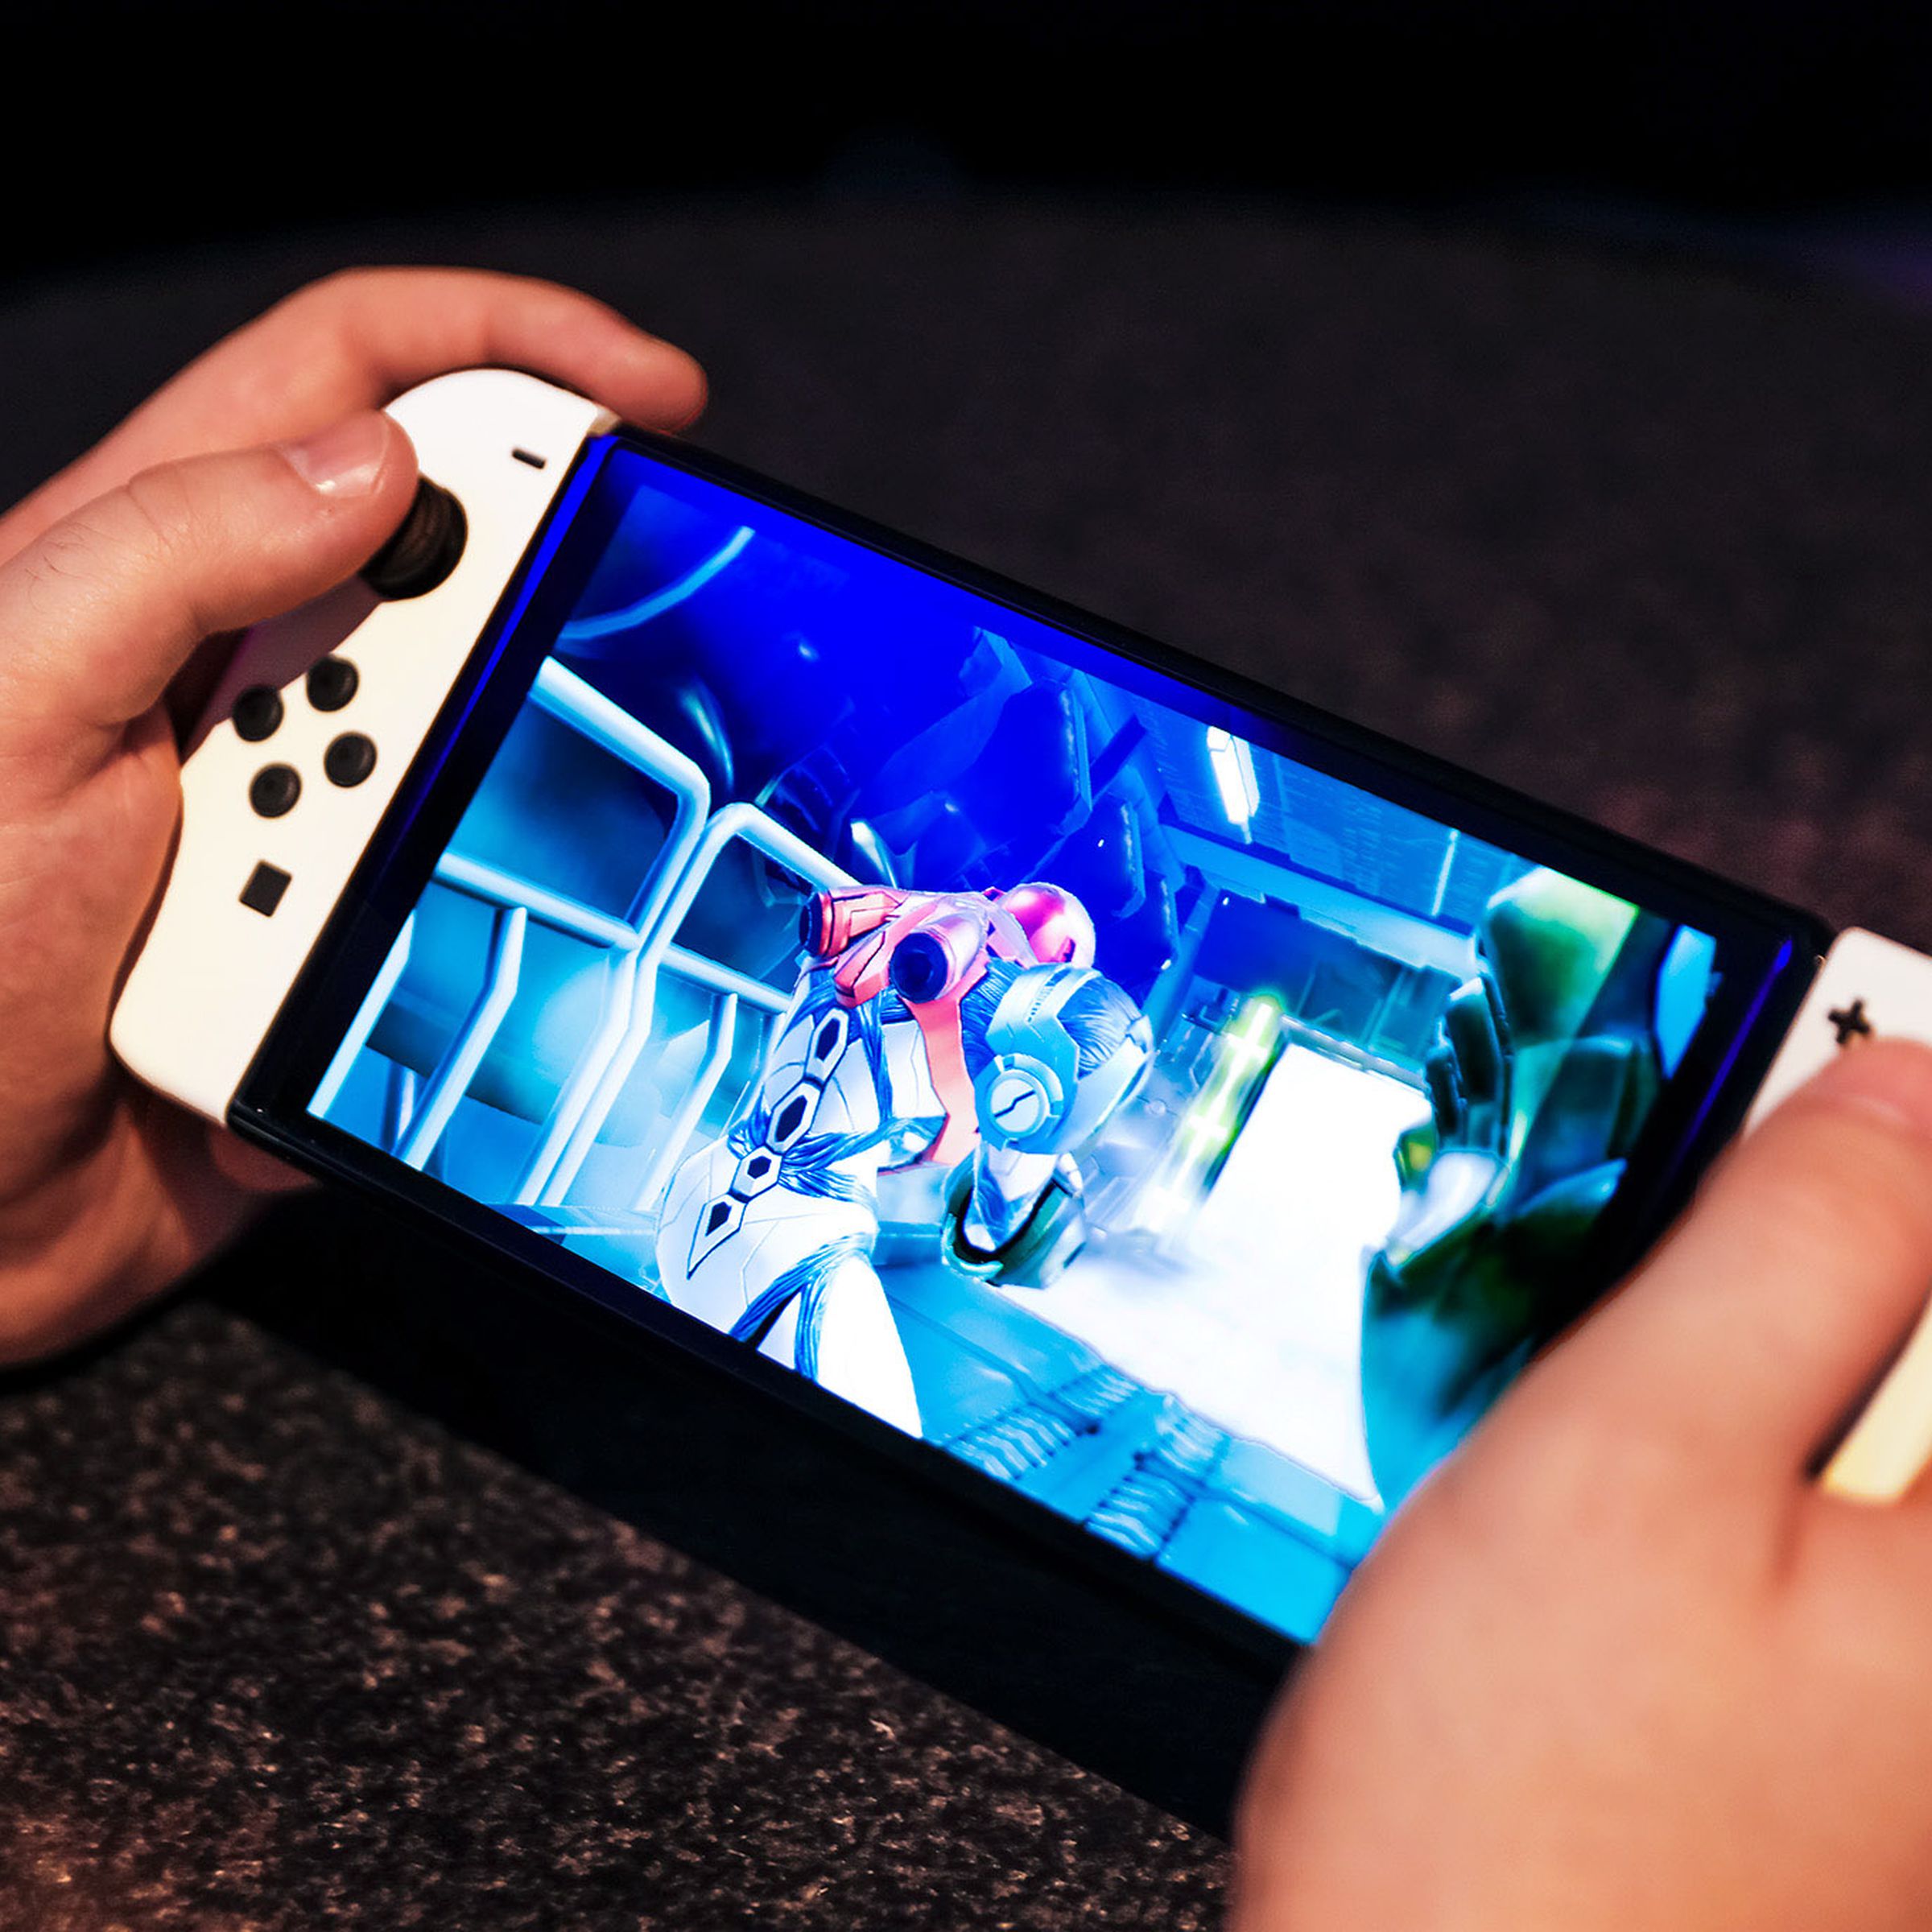 A pair of hands holding the Nintendo Switch OLED